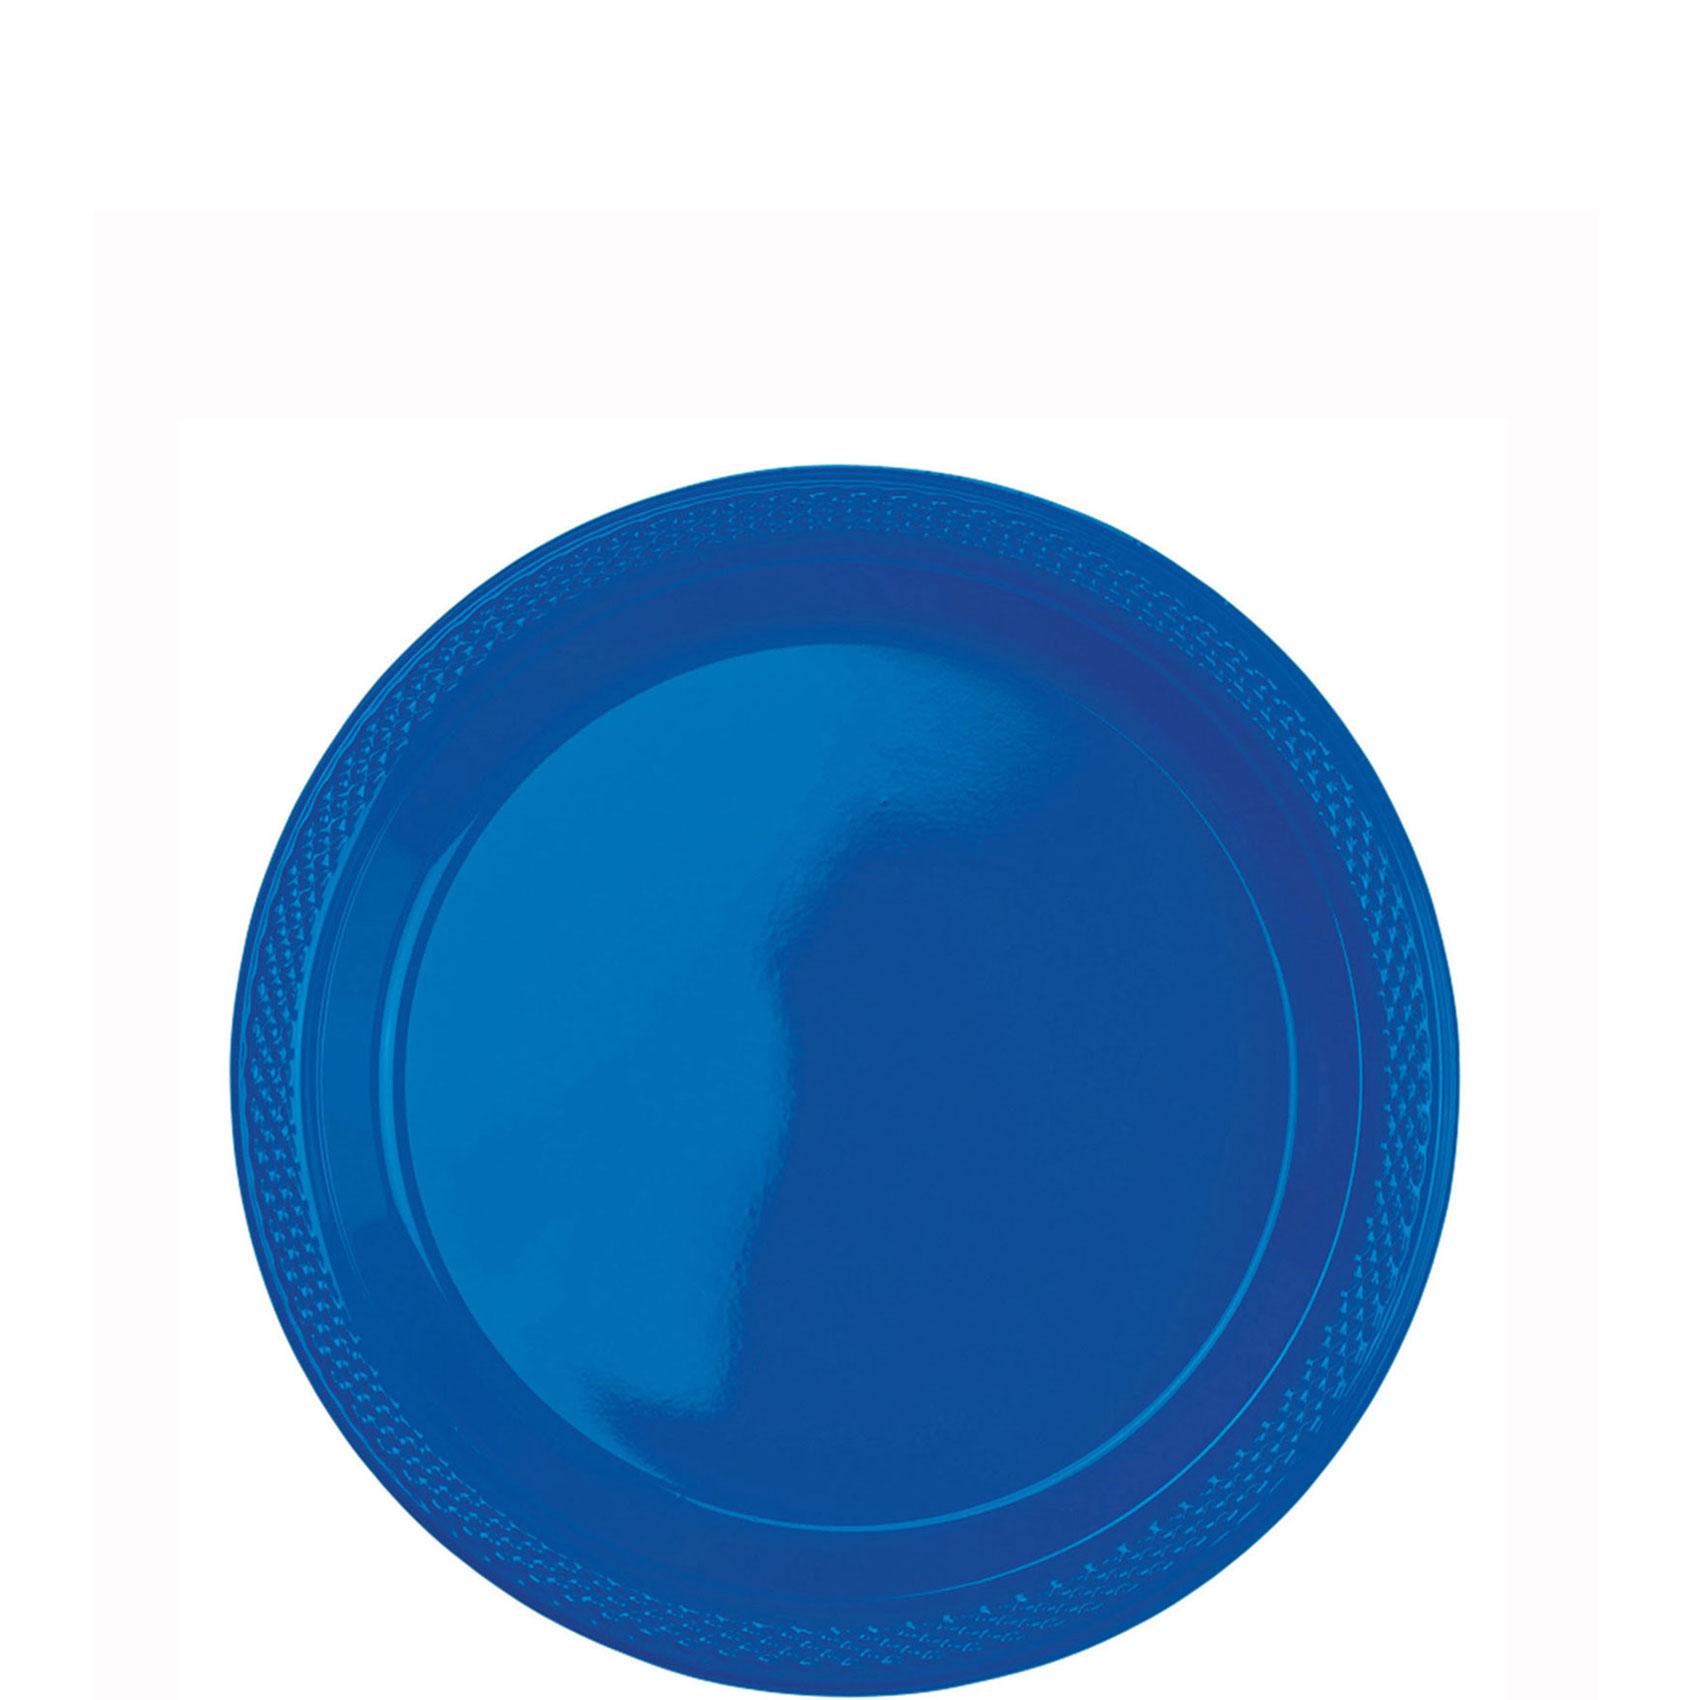 Bright Royal Blue Plates 7in, 20pcs Solid Tableware - Party Centre